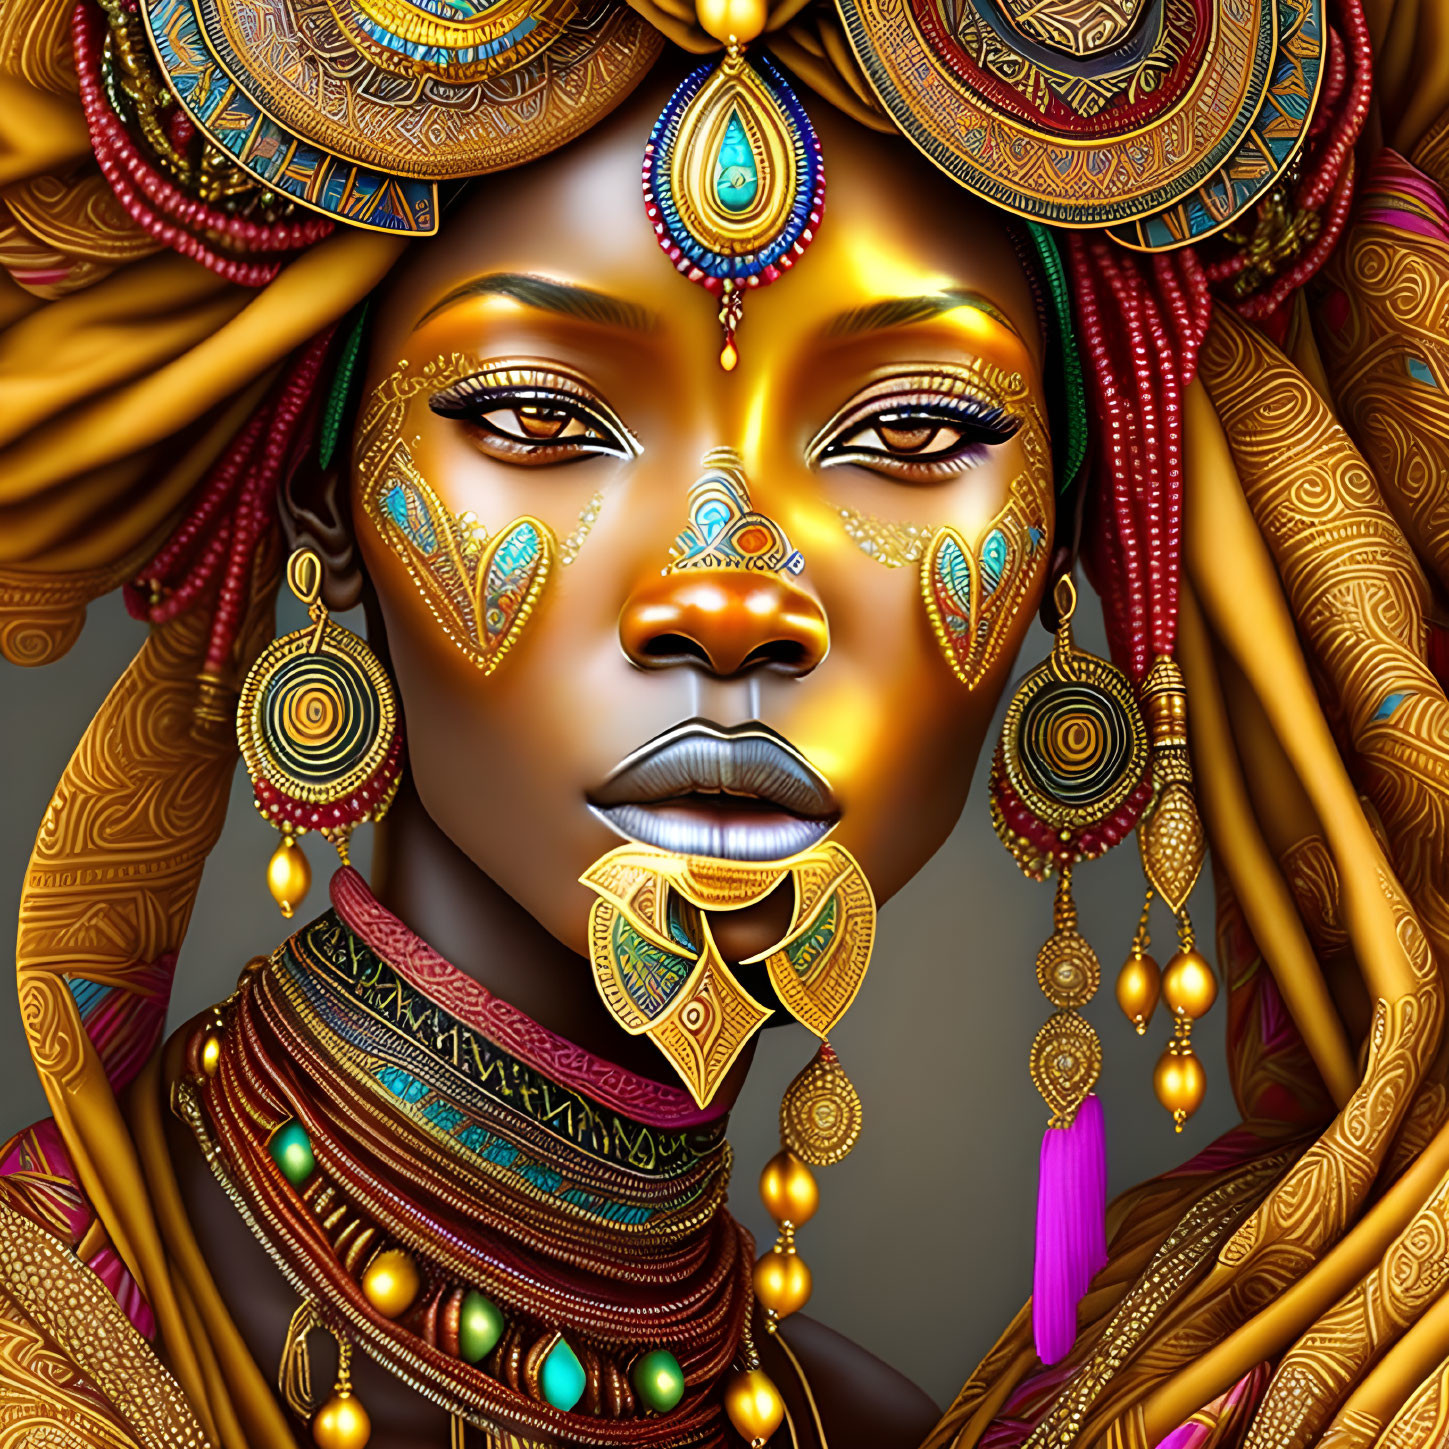 Detailed illustration of woman in ornate traditional attire with golden jewelry and face paint.